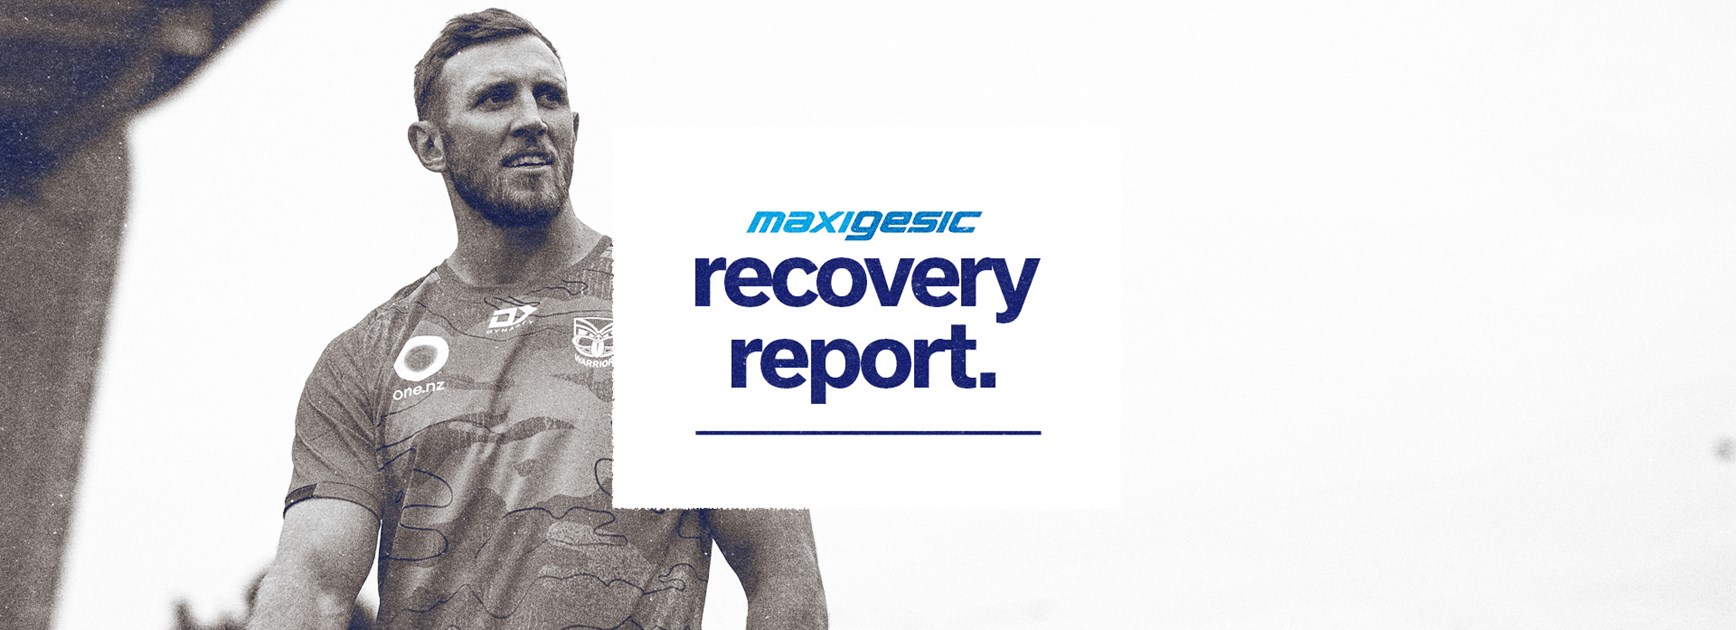 Maxigesic Recovery Report: No update on Capewell